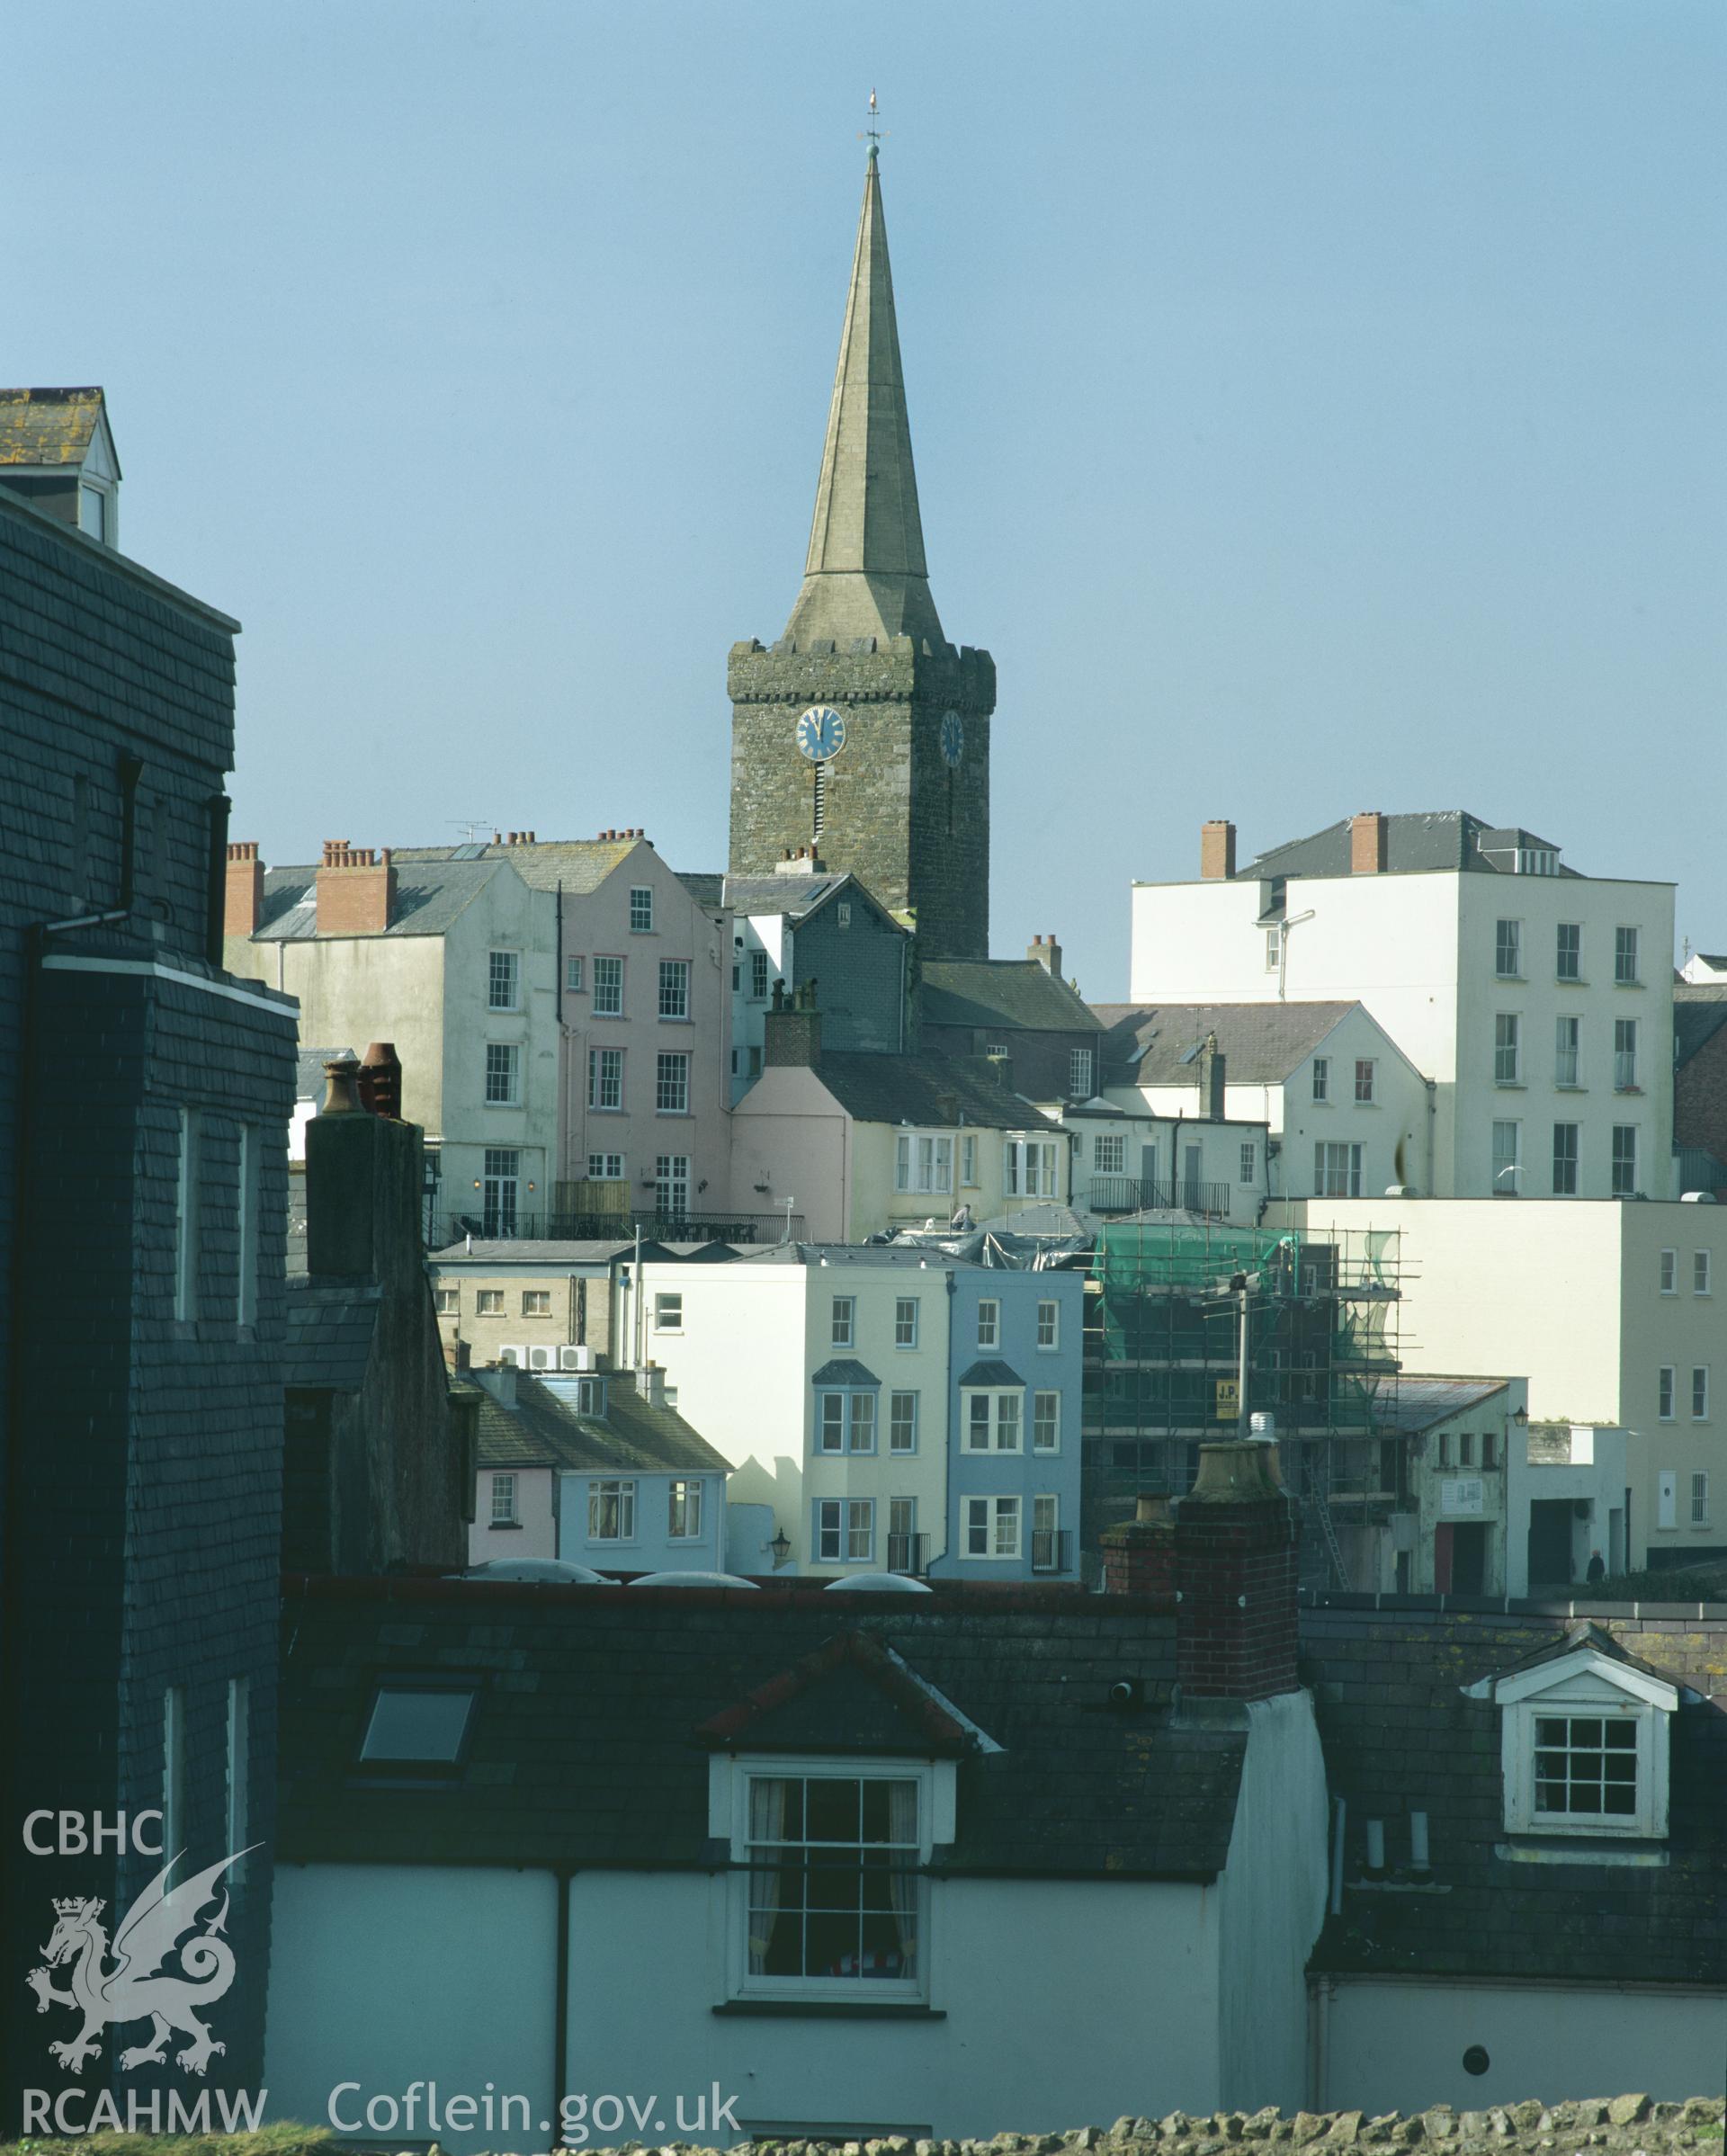 RCAHMW colour transparency showing St Marys Church, Tenby, taken by Iain Wright, 2003.